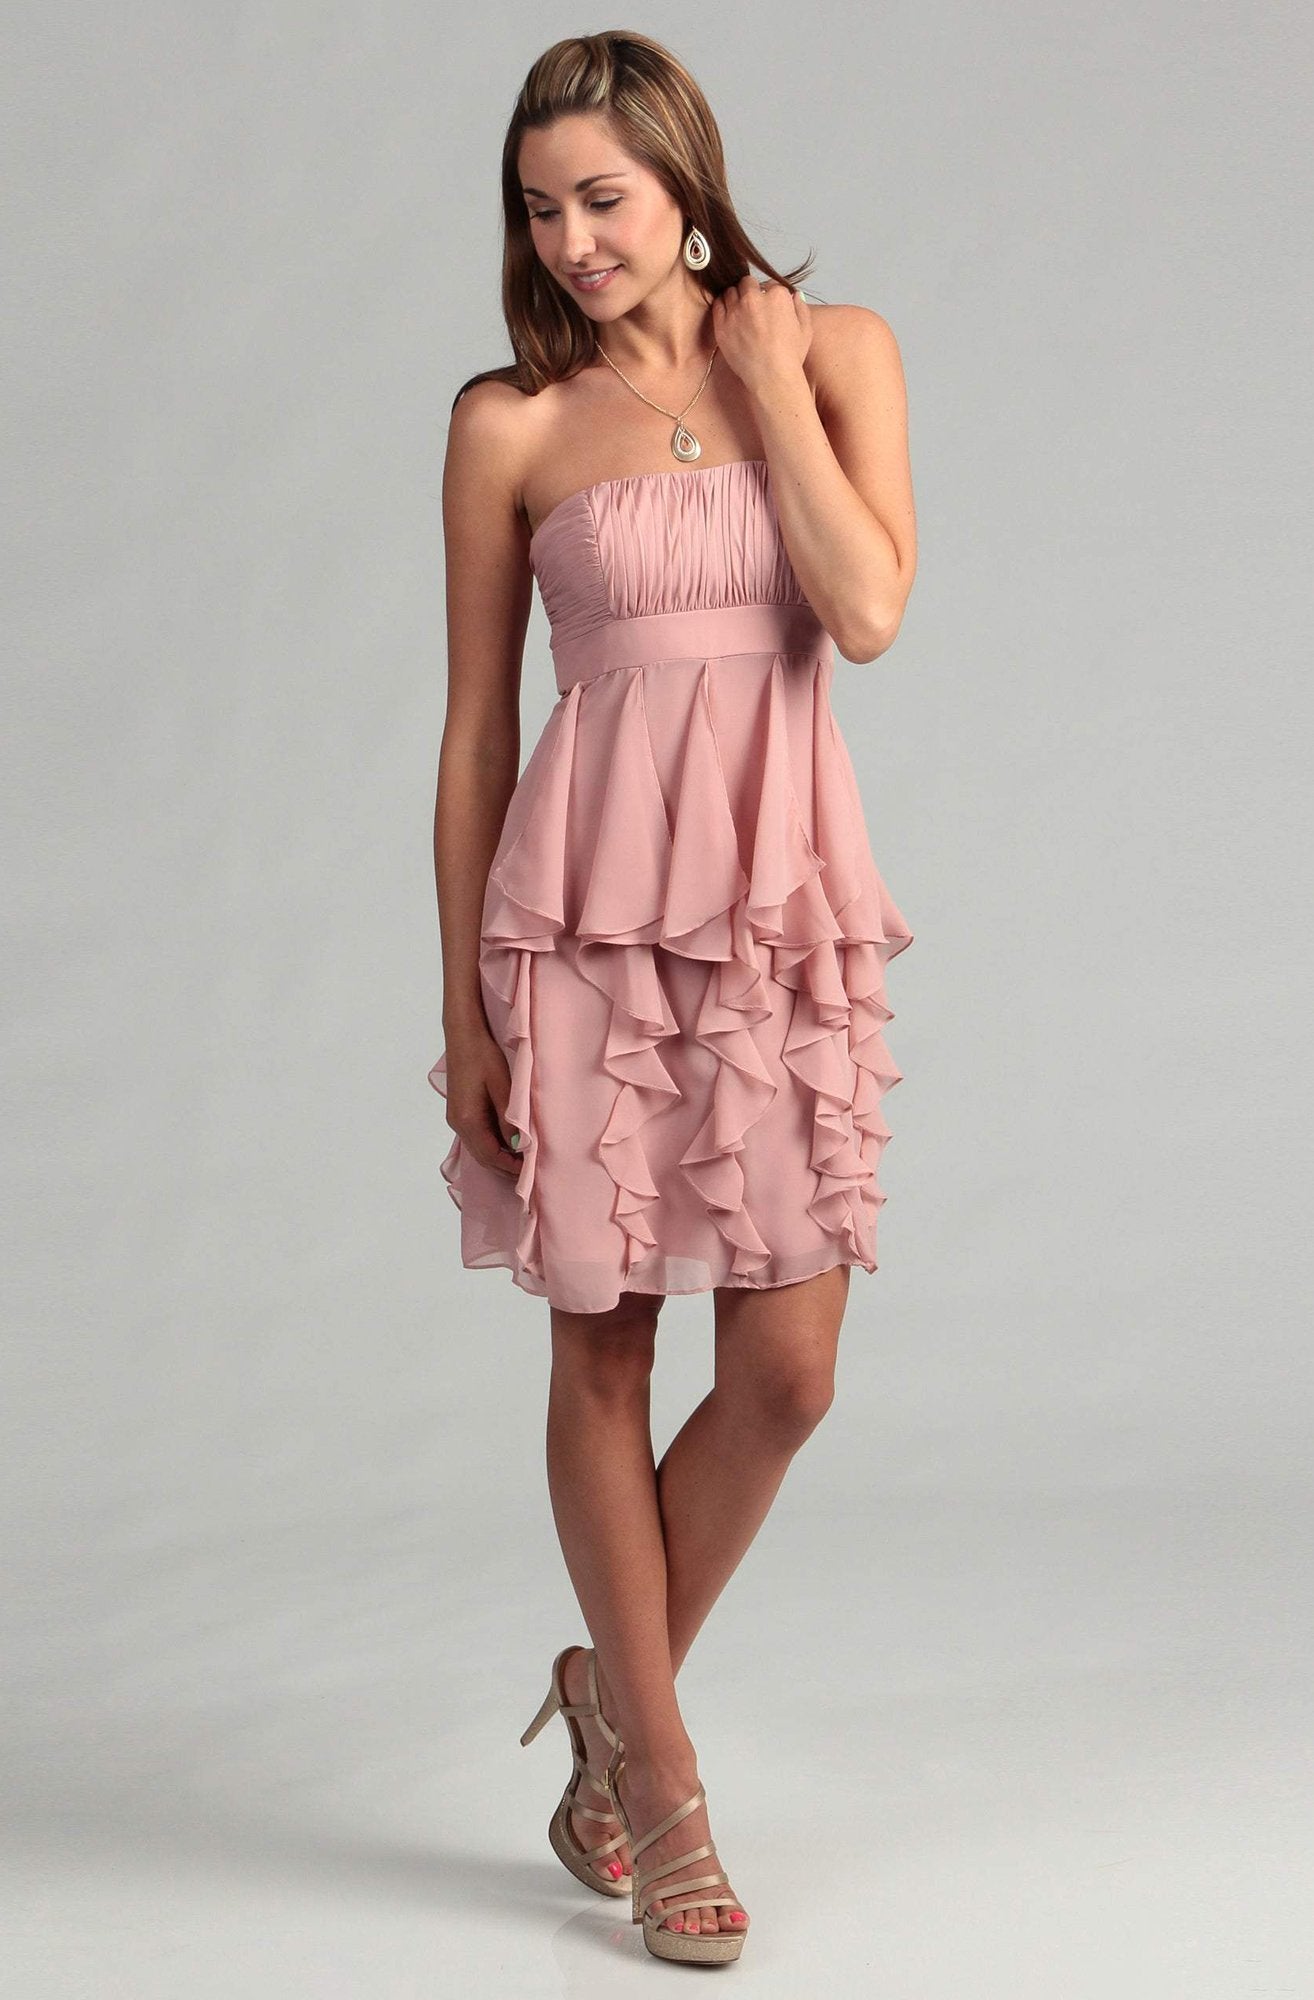 Adrianna Papell - 231M26730 Ruched Bodice Flutter Panel Chiffon Dress. In Pink